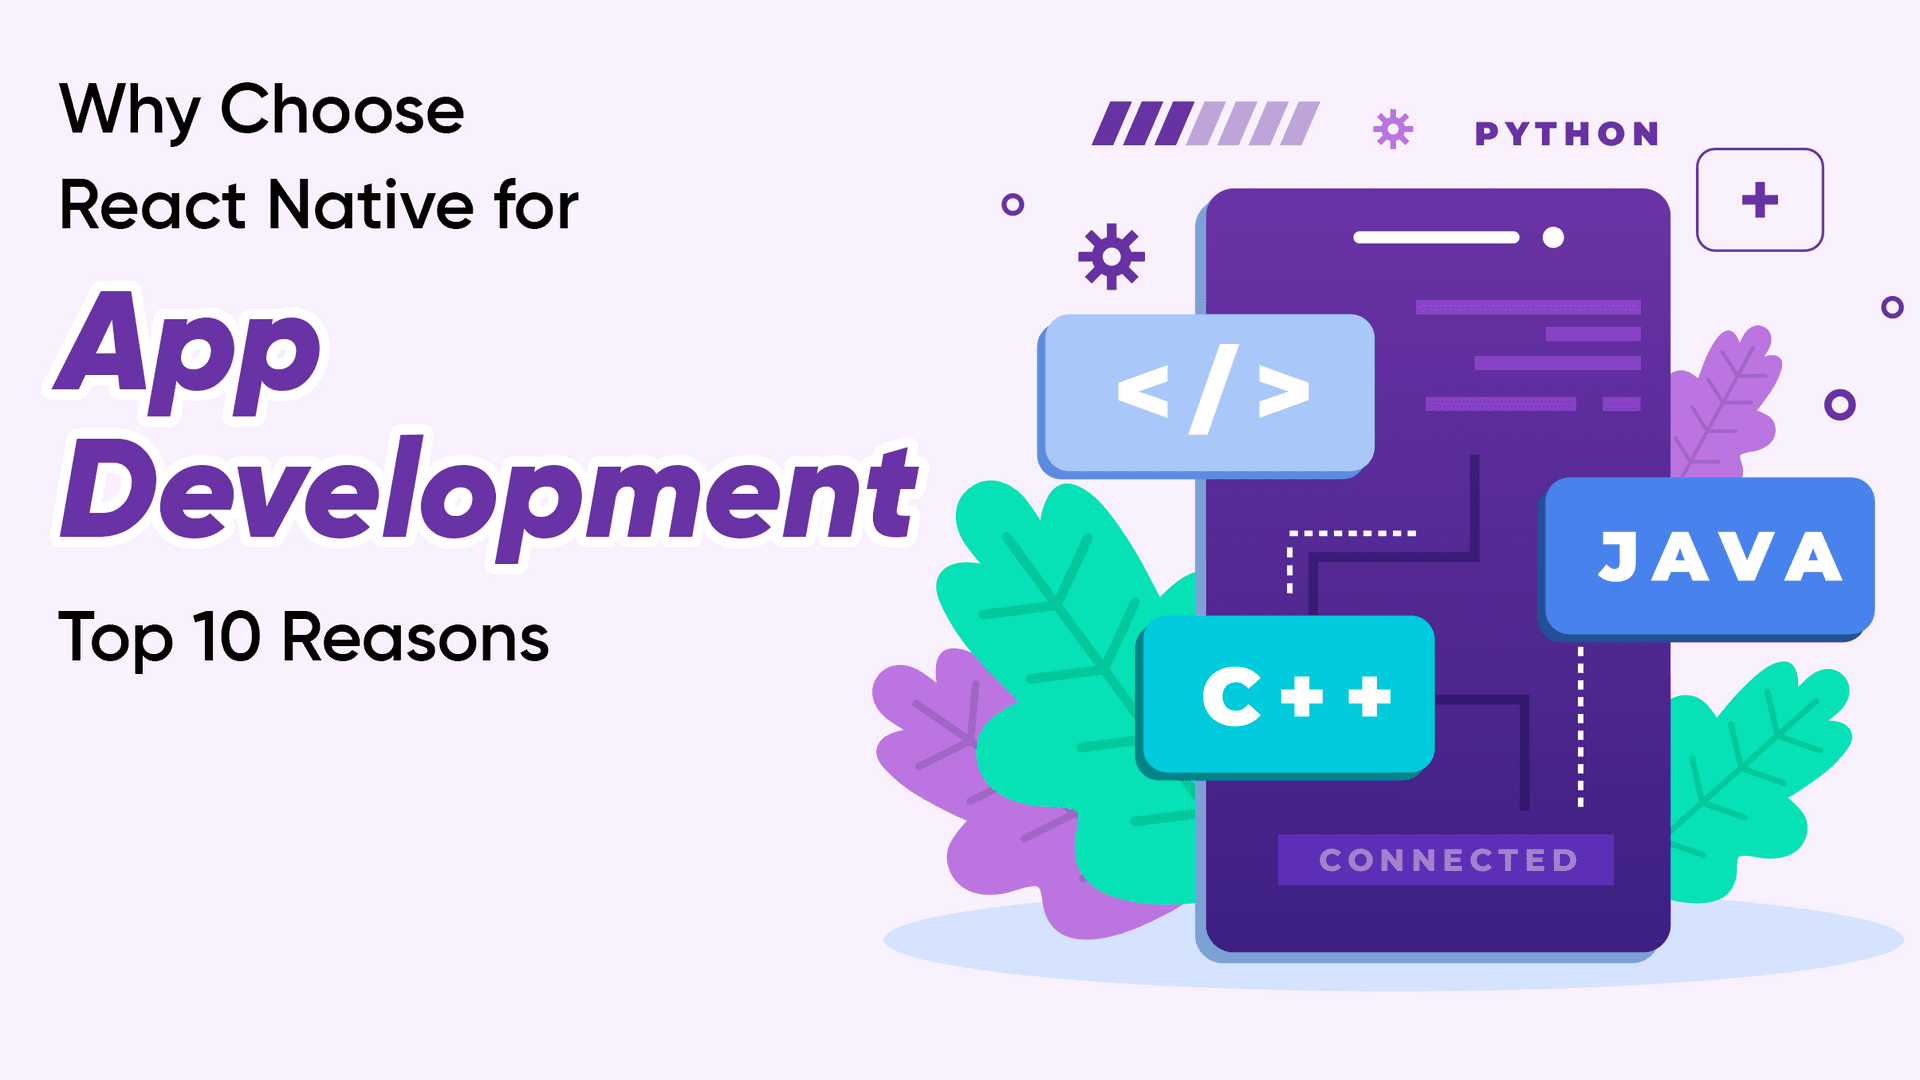 Why Choose React Native for App Development: Top 10 Reasons